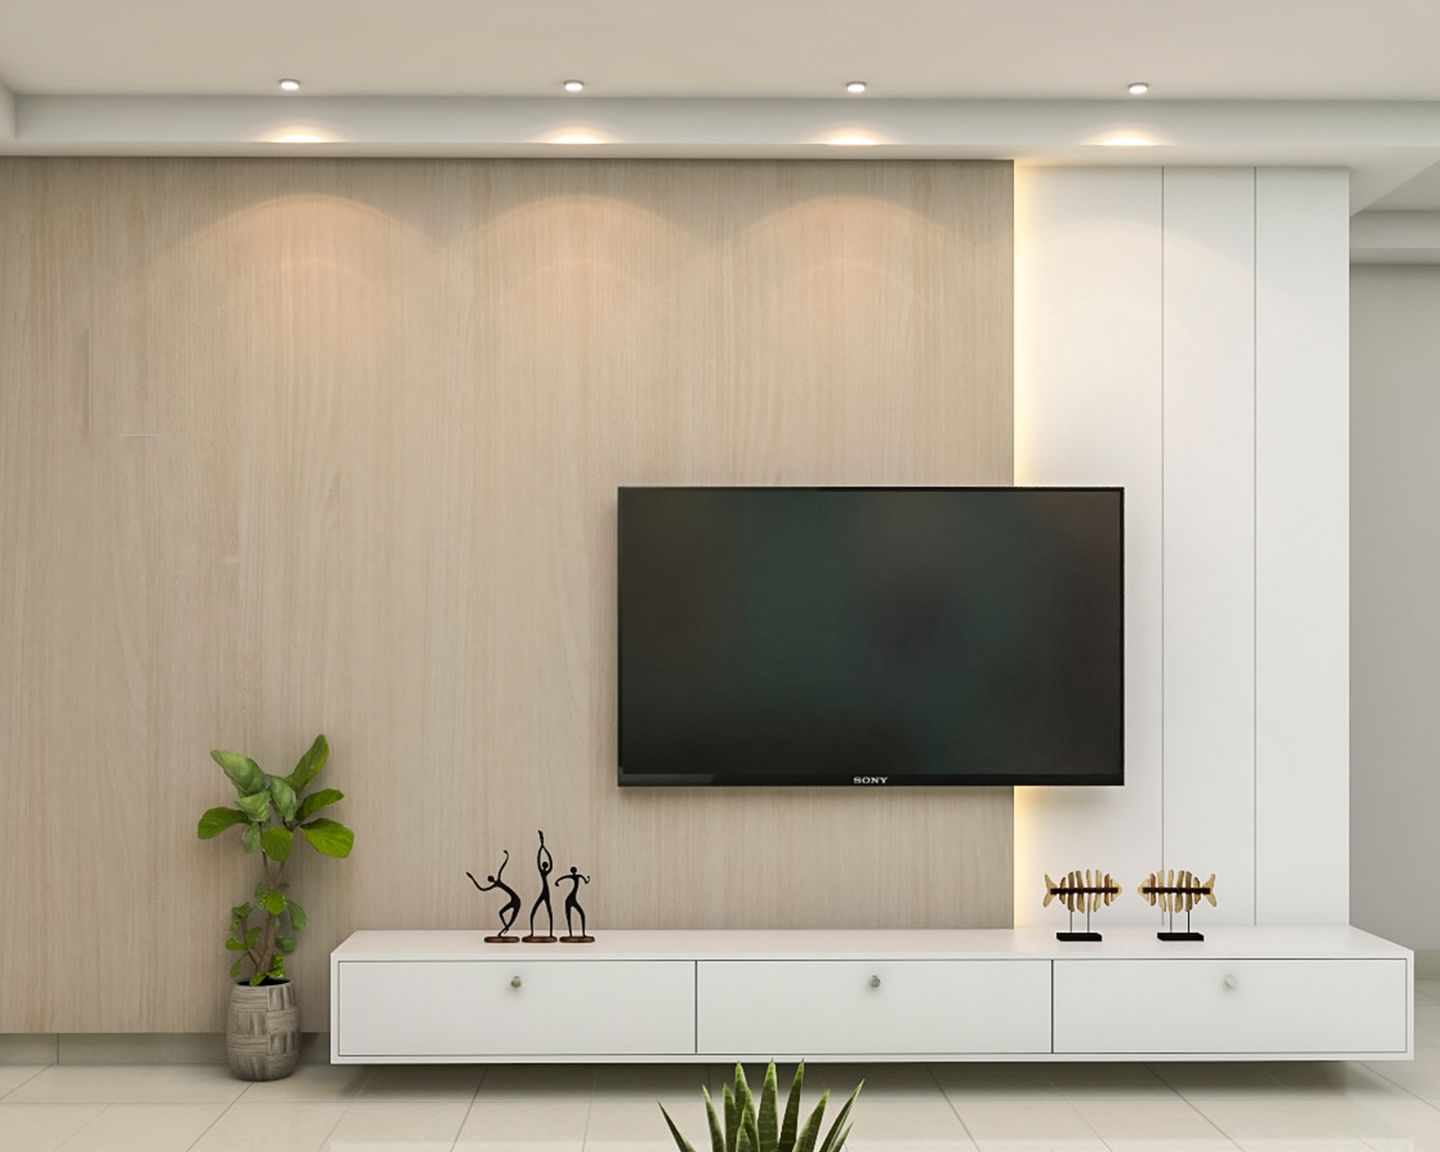 Modern TV Unit Design With Earthy Shades - Livspace